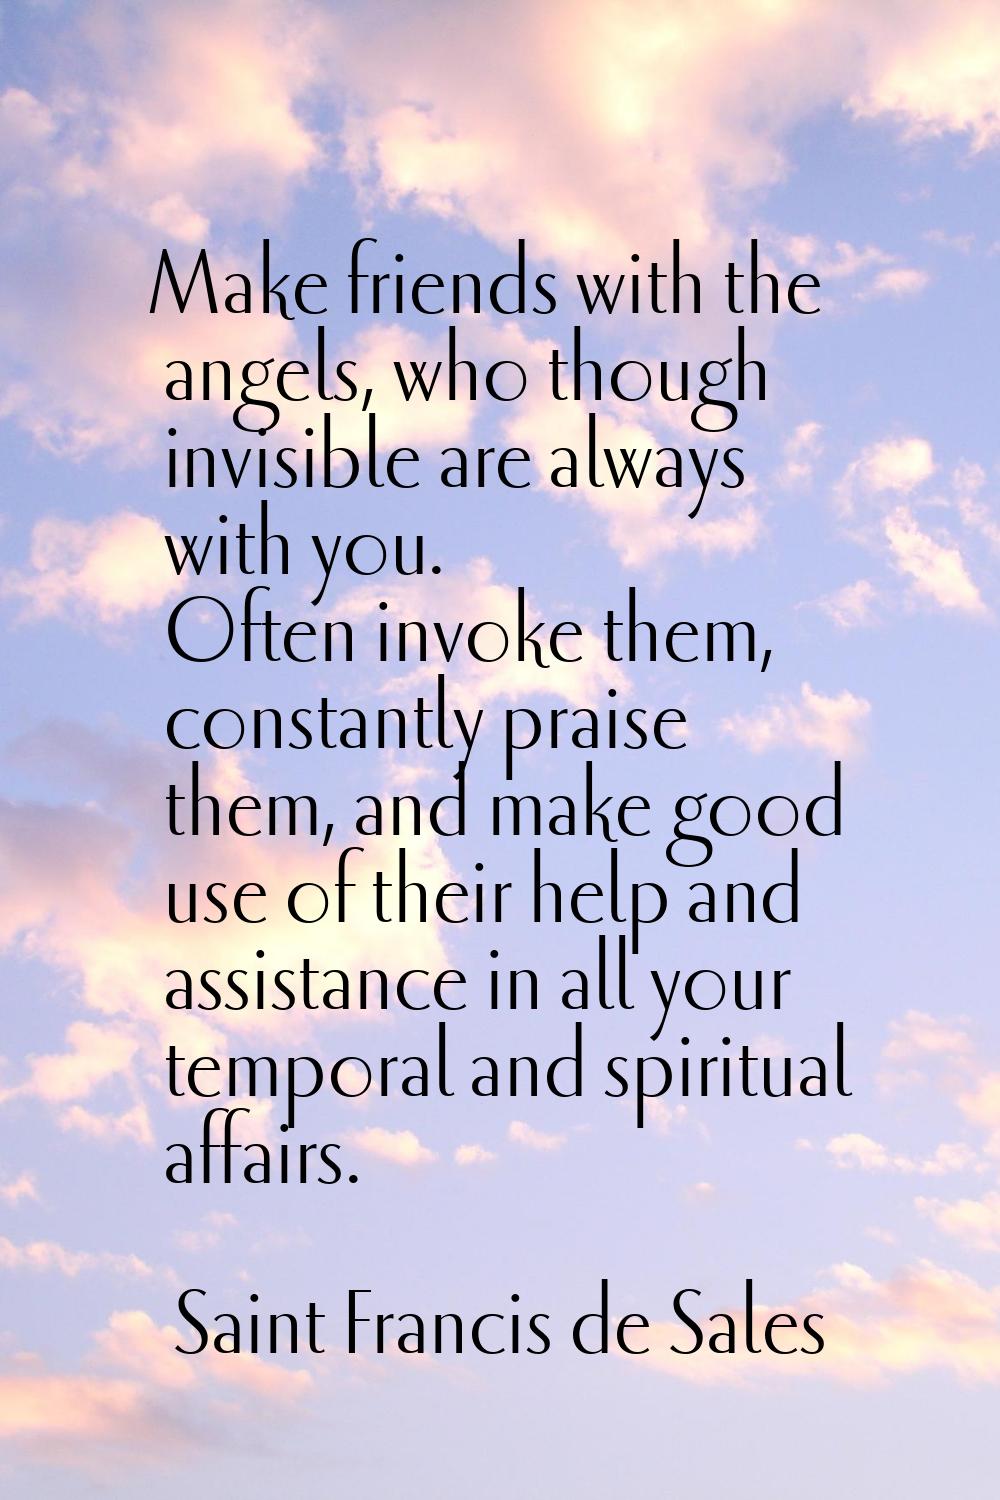 Make friends with the angels, who though invisible are always with you. Often invoke them, constant